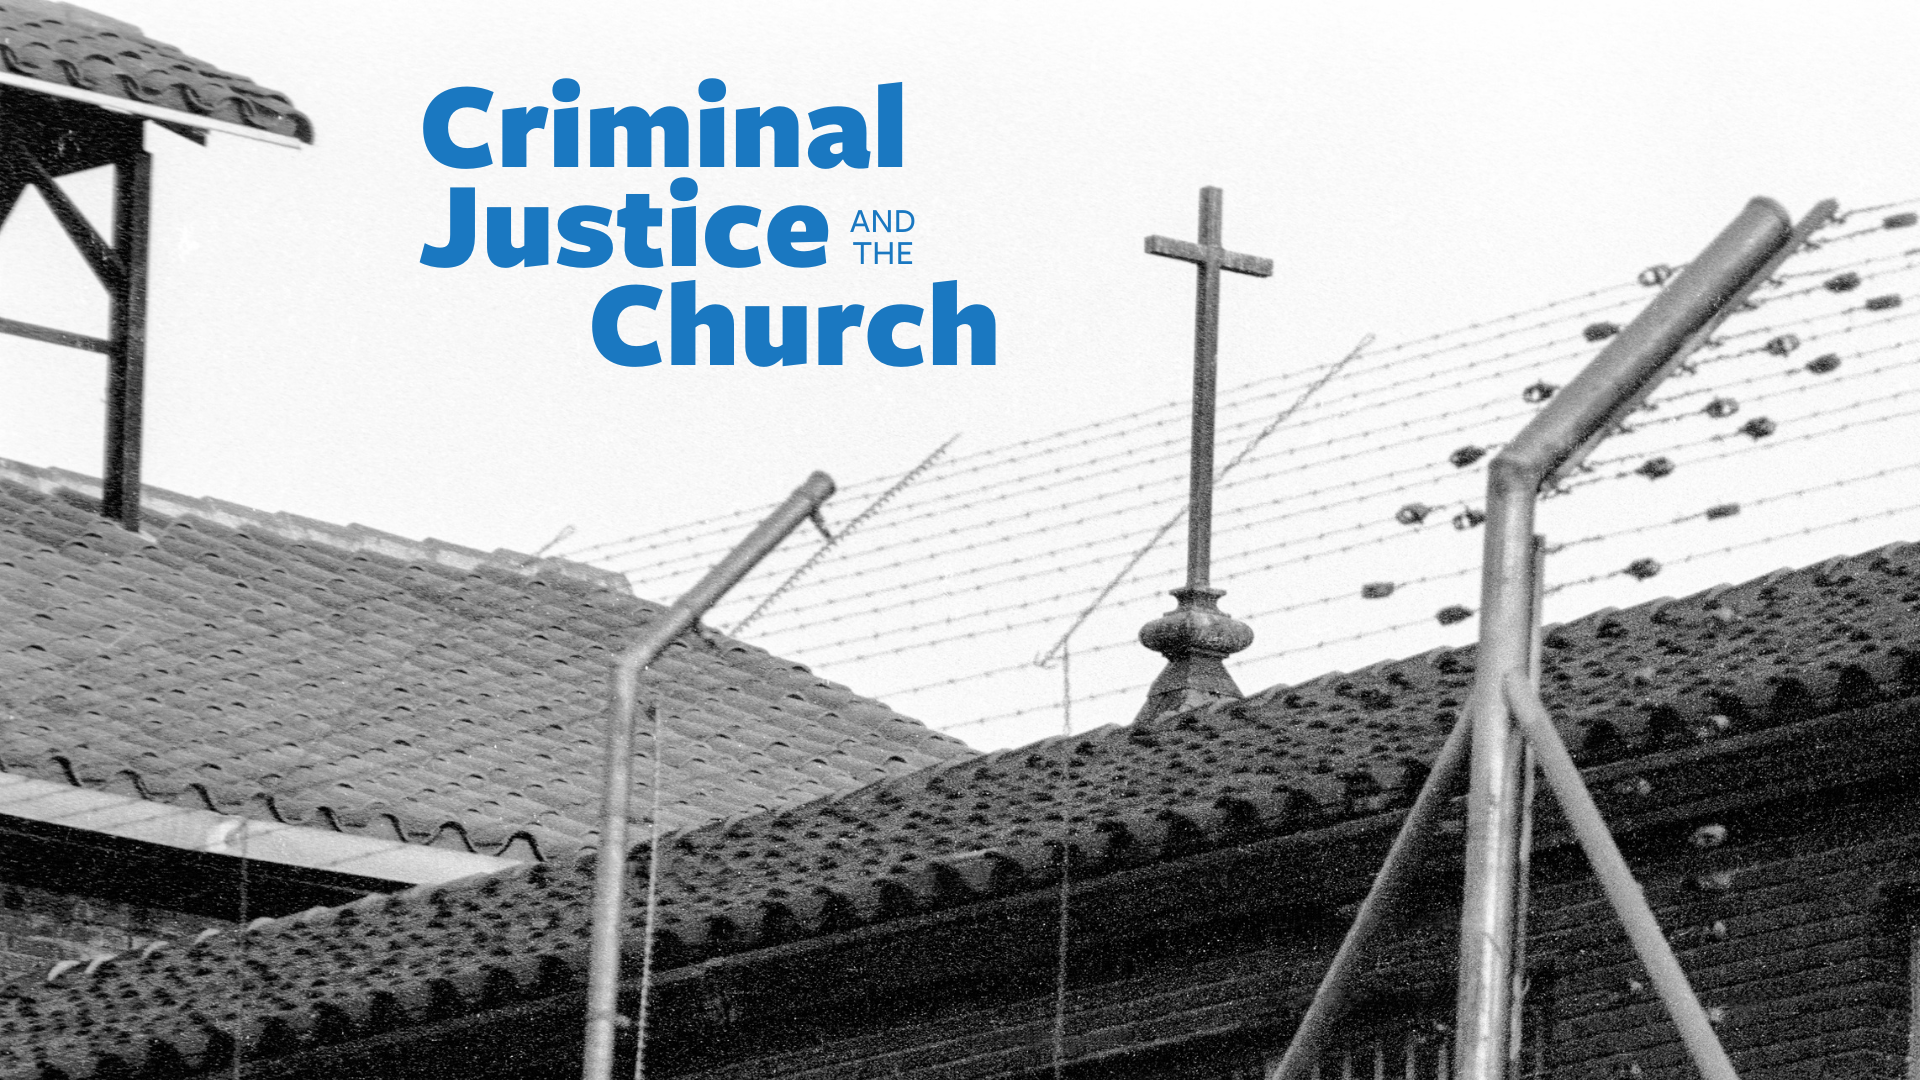 Criminal Justice and the Church